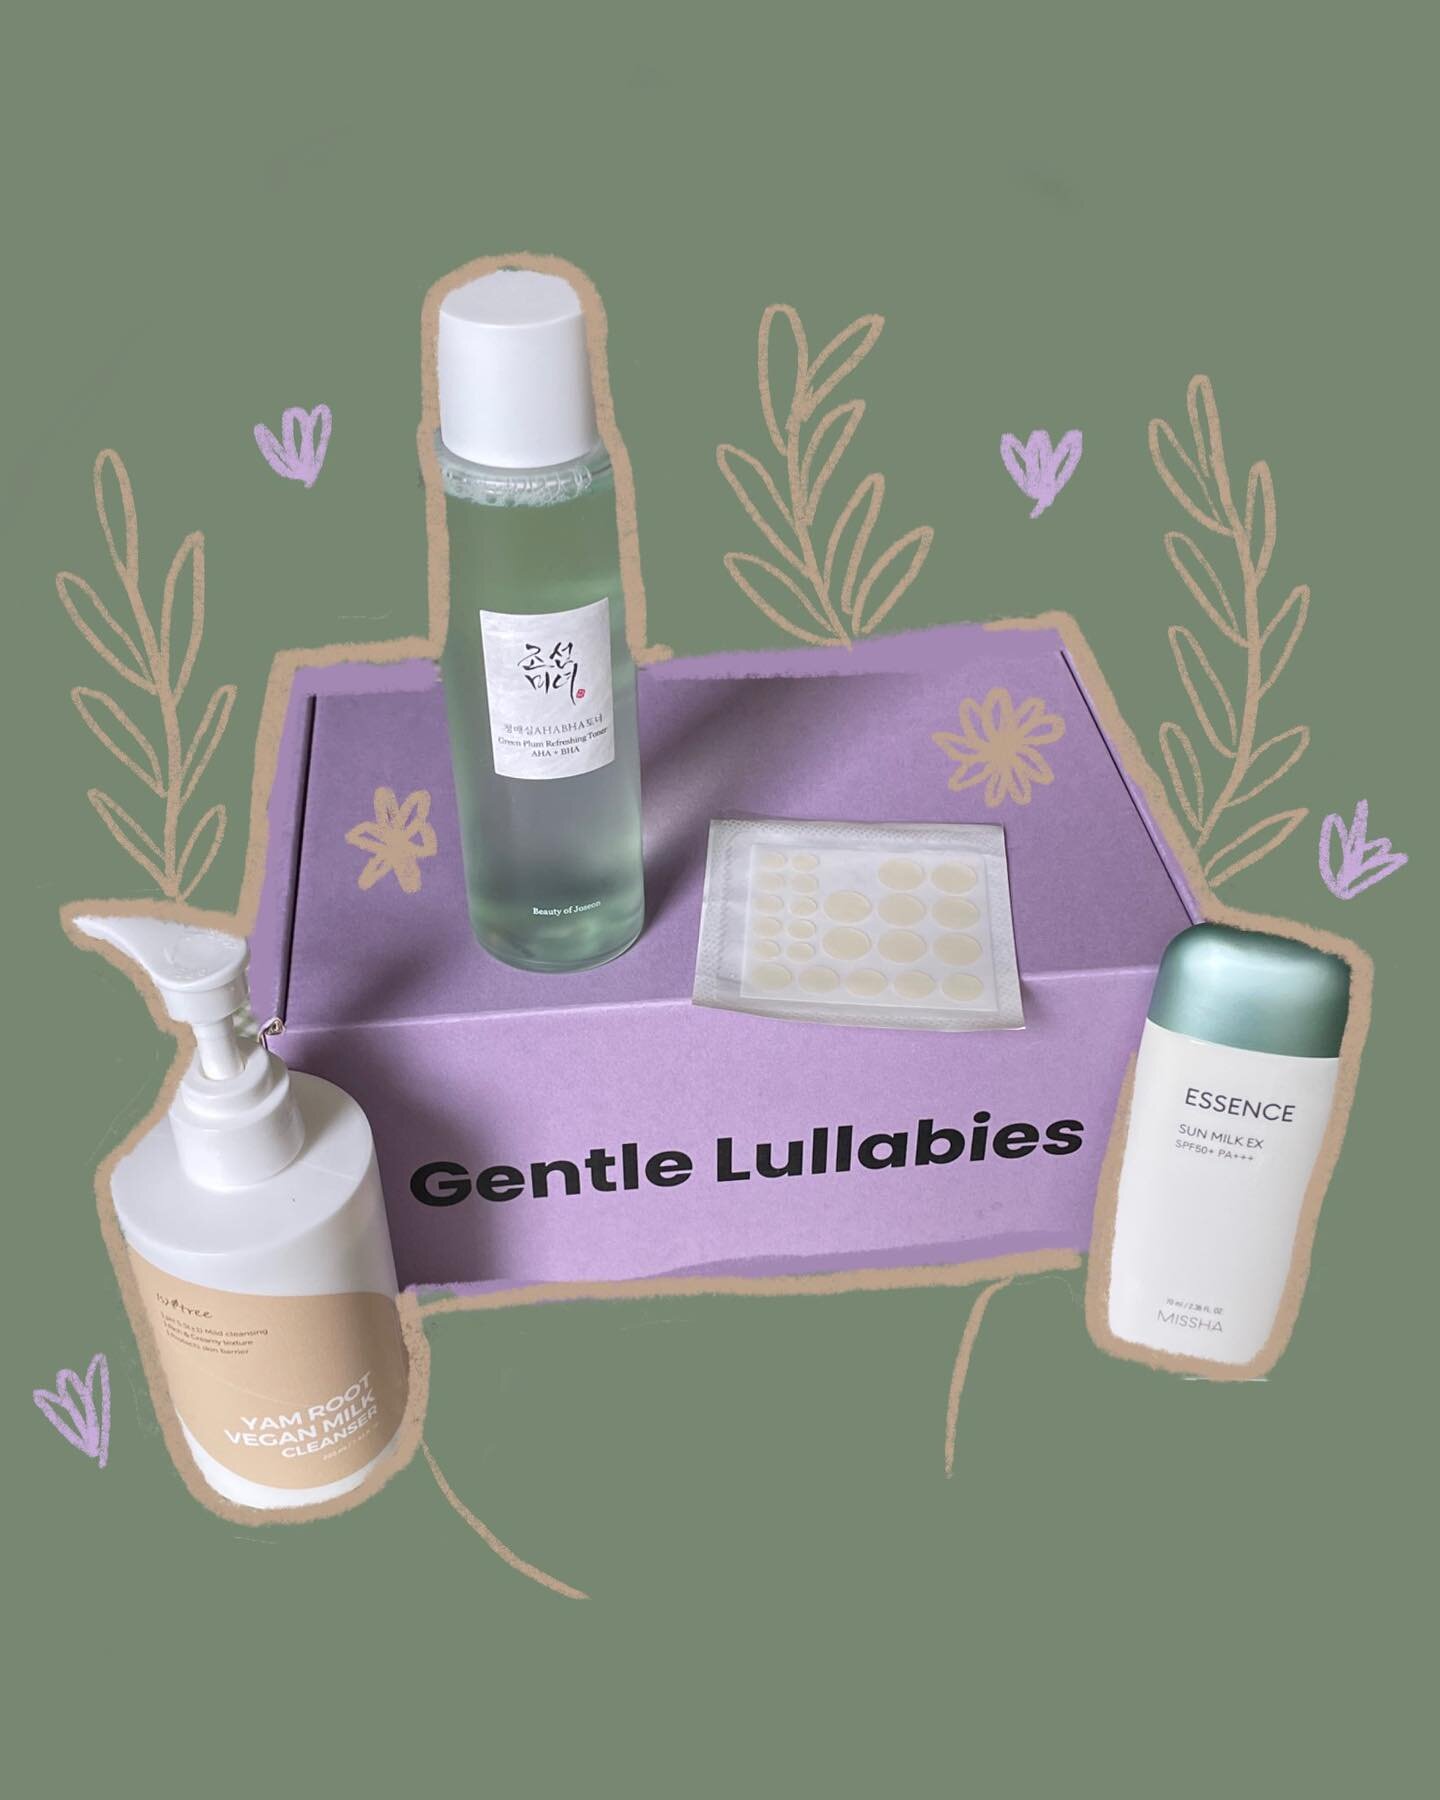 Peep this adorable graphic made by the talented @cindydoinstuff! 😮&zwj;💨

Products in pic:
1) Isntree Yam Root Vegan Milk Cleanser
2) Beauty of Joseon Green Plum Refreshing Toner AHA + BHA 
3) COSRX Acne Pimple Master Patch
4) Missha All Around Saf